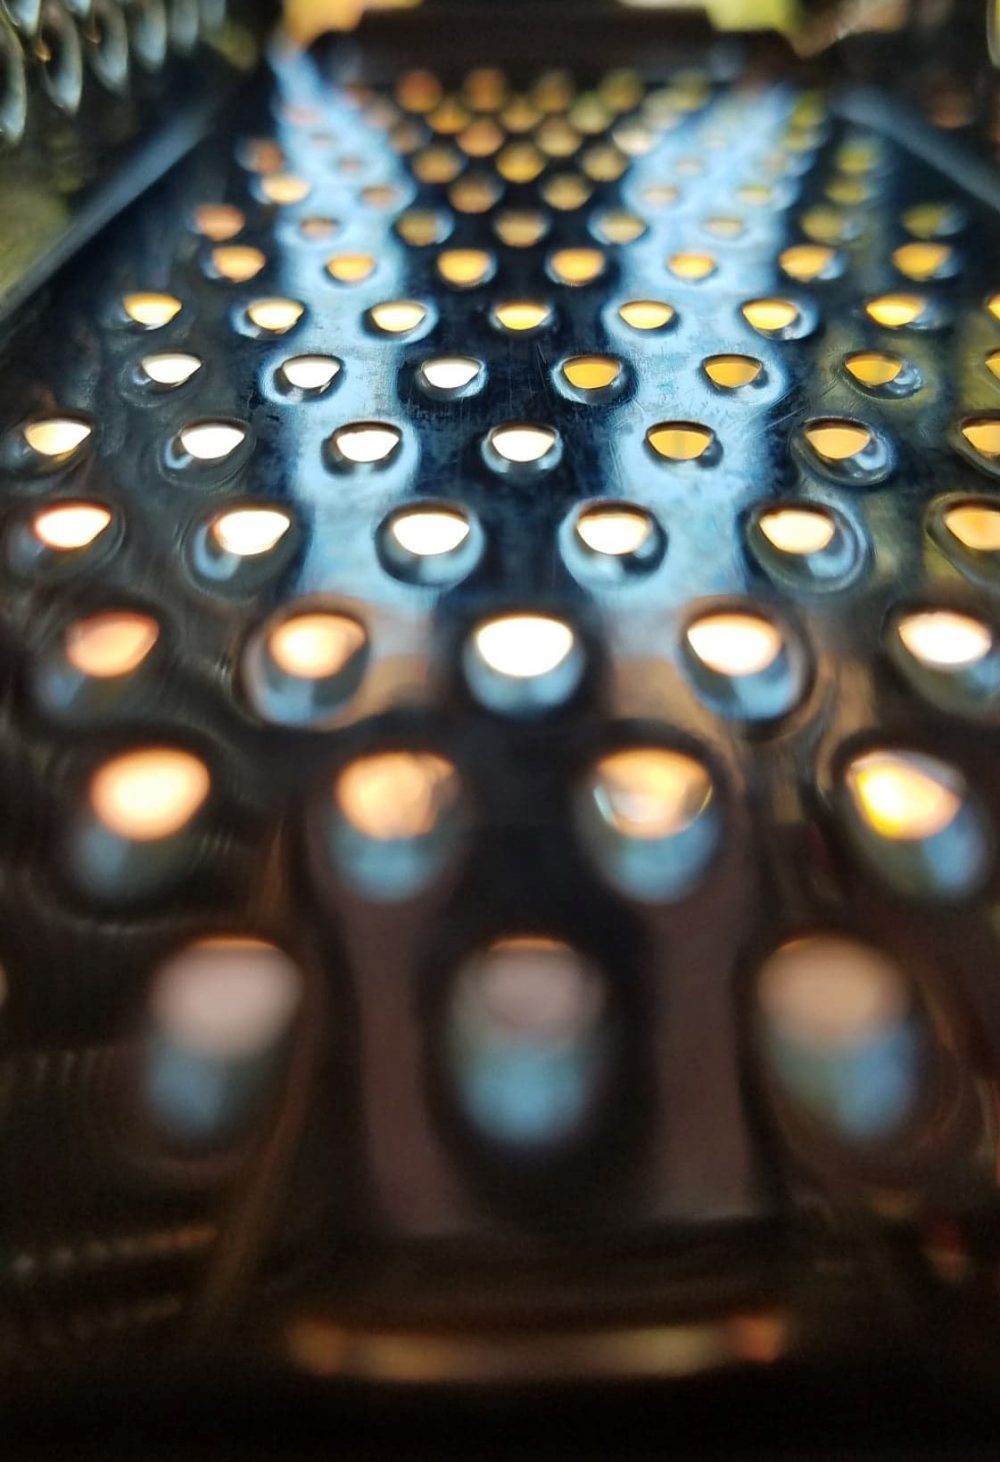 A macro photo of a zester with light coming through the holes.